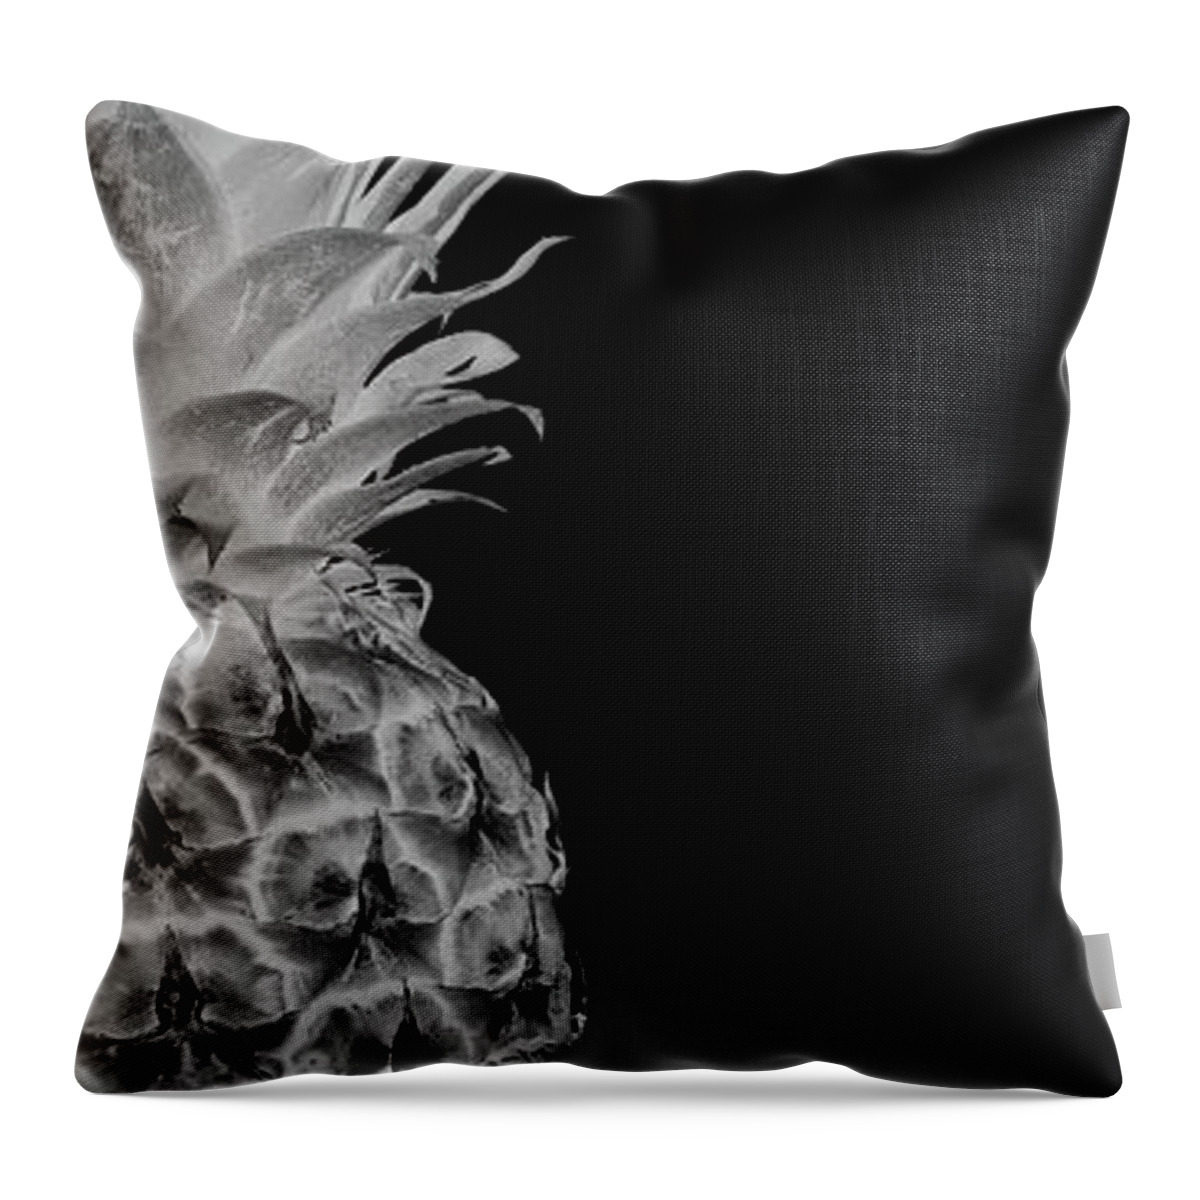 Abstract Throw Pillow featuring the photograph 14BR Artistic Glowing Pineapple Digital Art Greyscale by Ricardos Creations